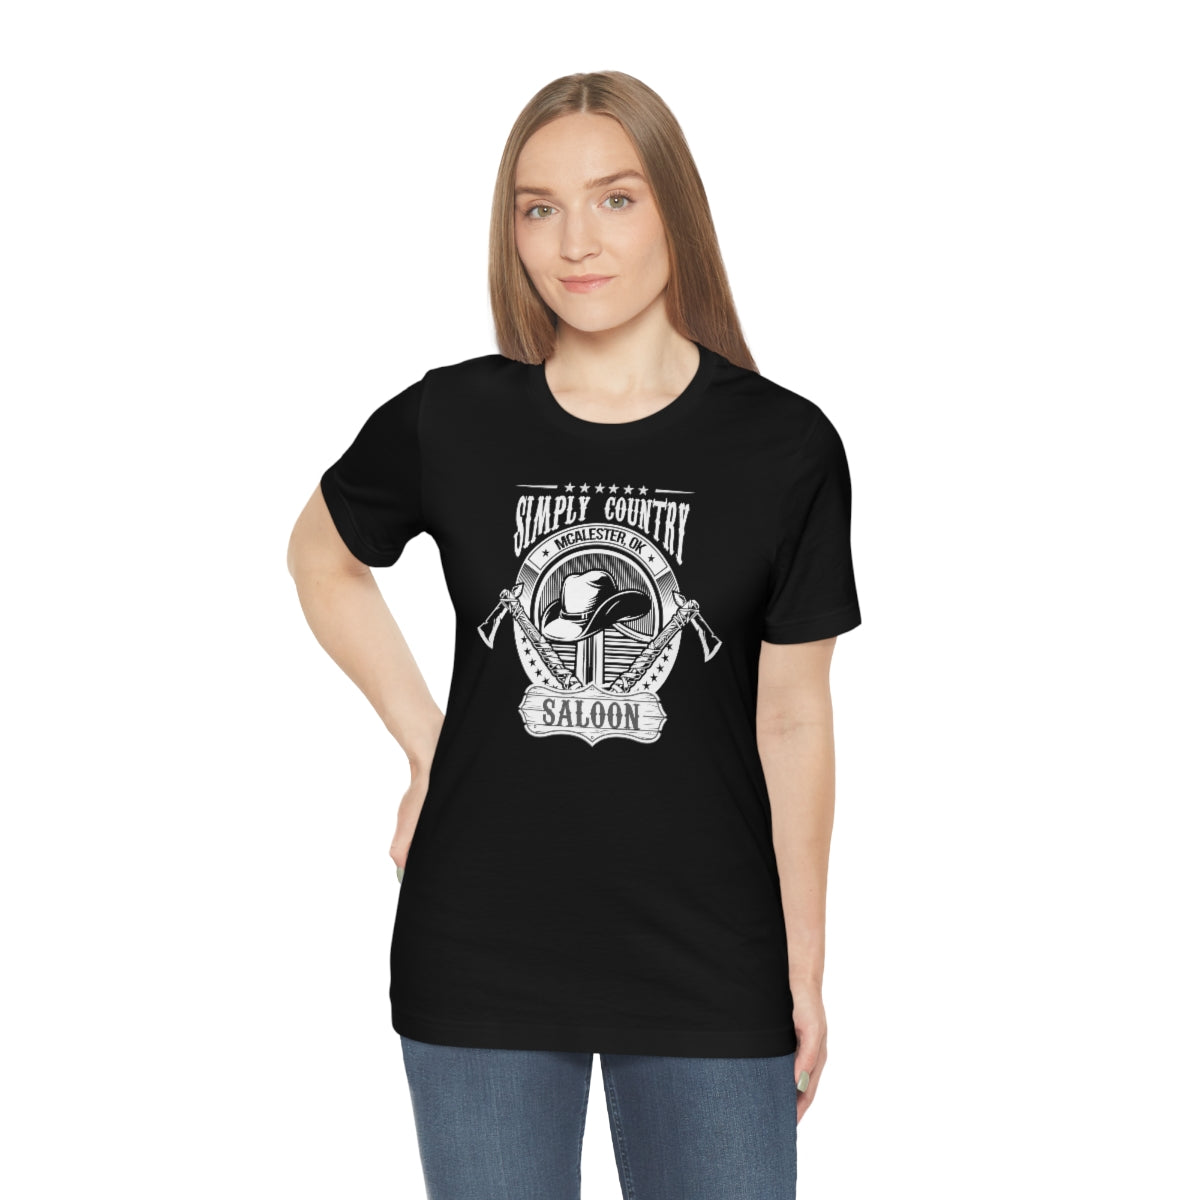 simply country saloon Unisex Jersey Short Sleeve Tee